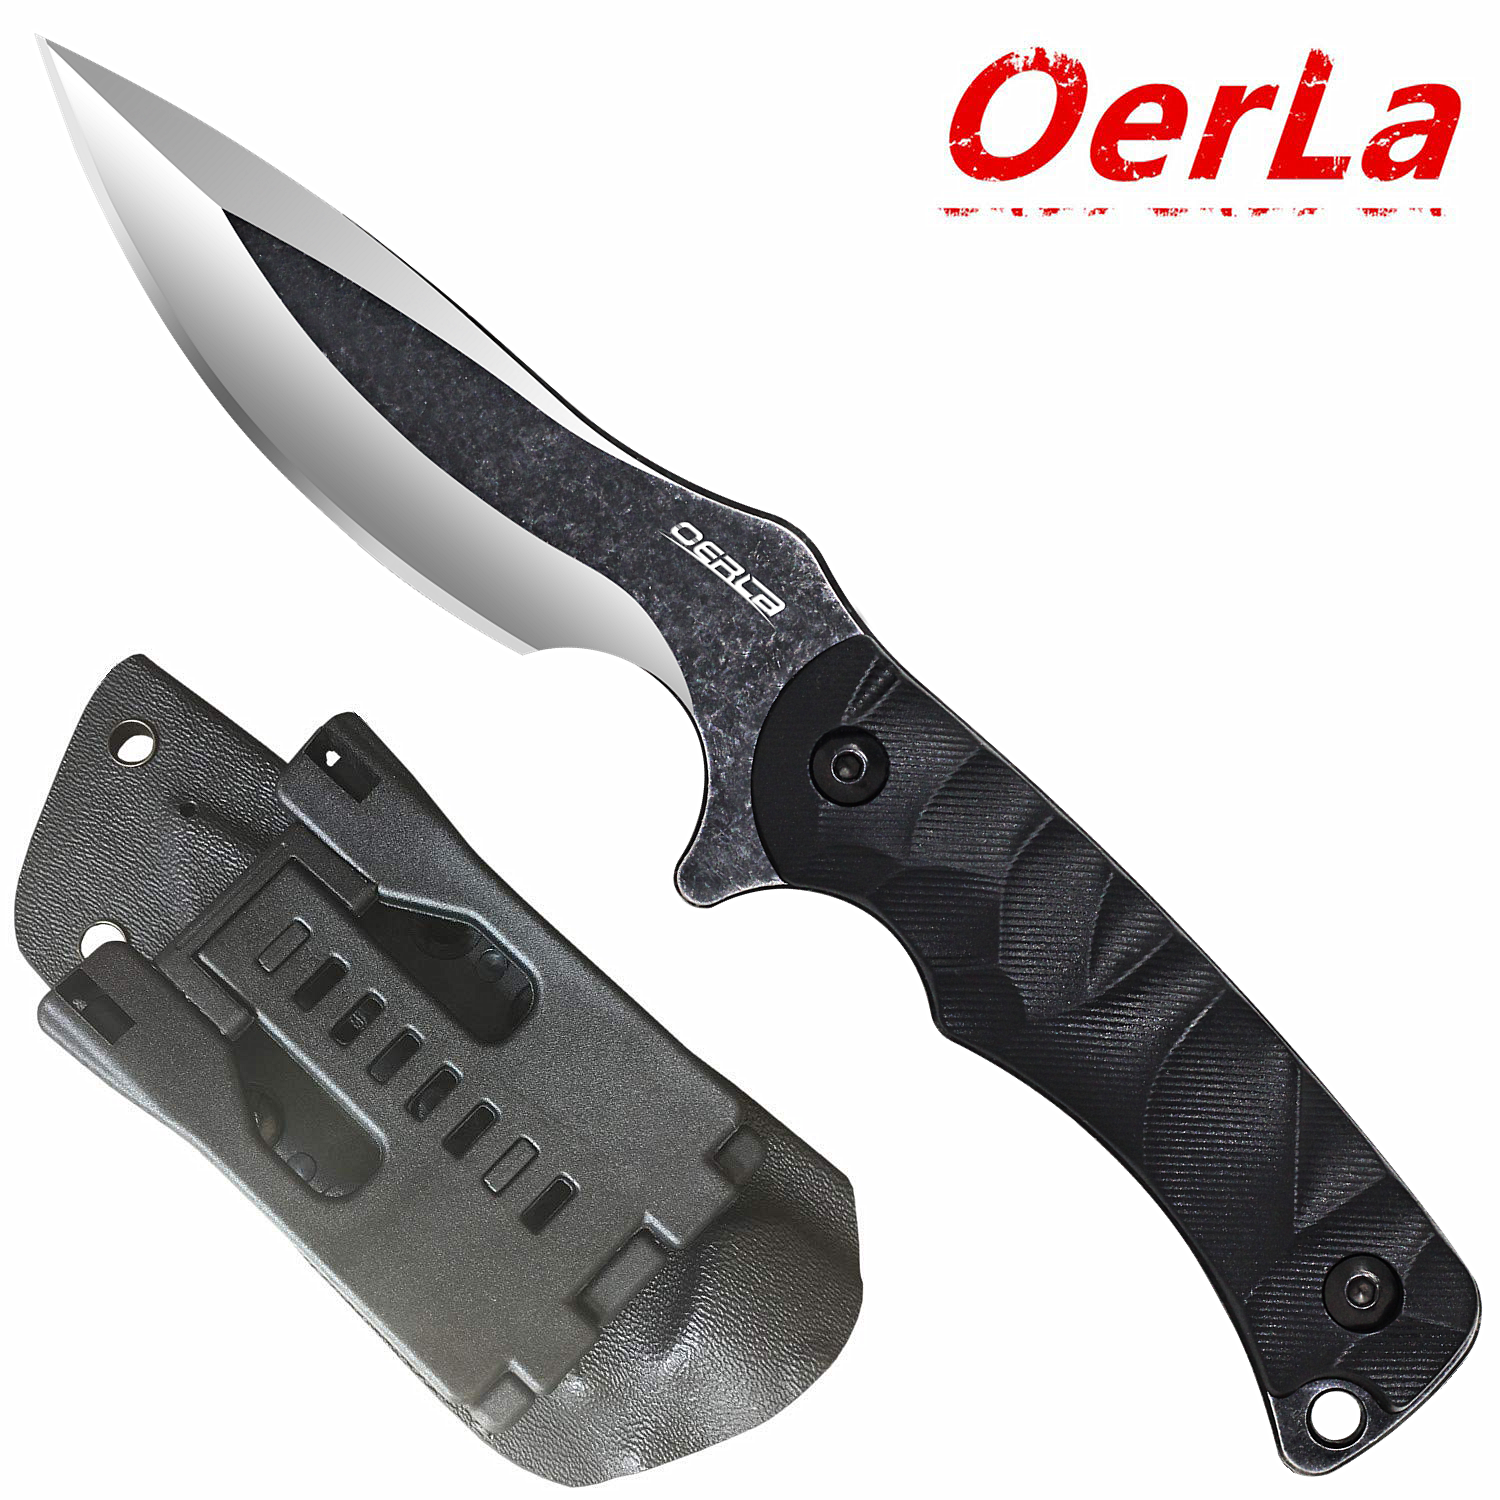 Oerla Outdoor Duty Fixed Blade Knife With Glass-filled Handle And Kydex Sheath